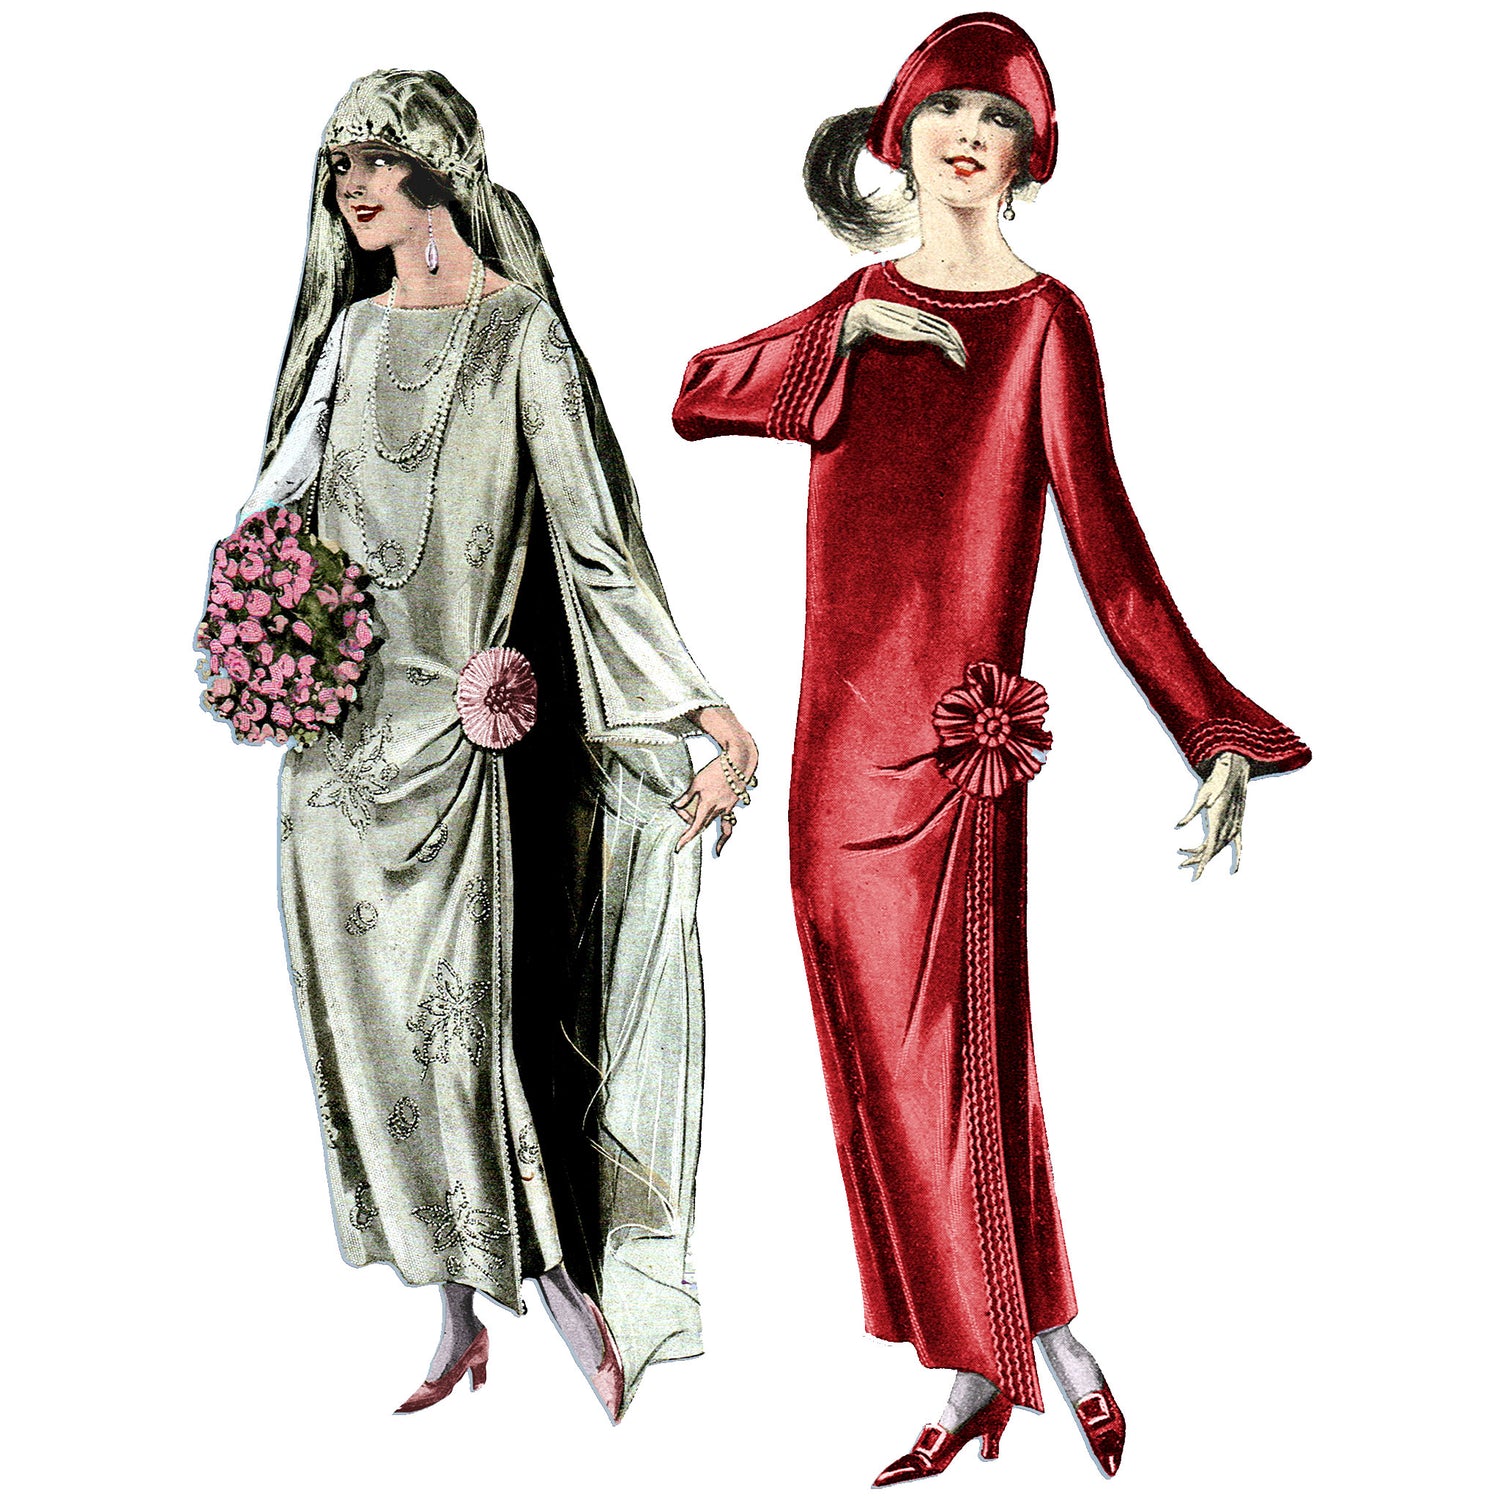 Models wearing 1920s wedding dress and formal dress in red and in white made from Pictorial Review 1940 pattern